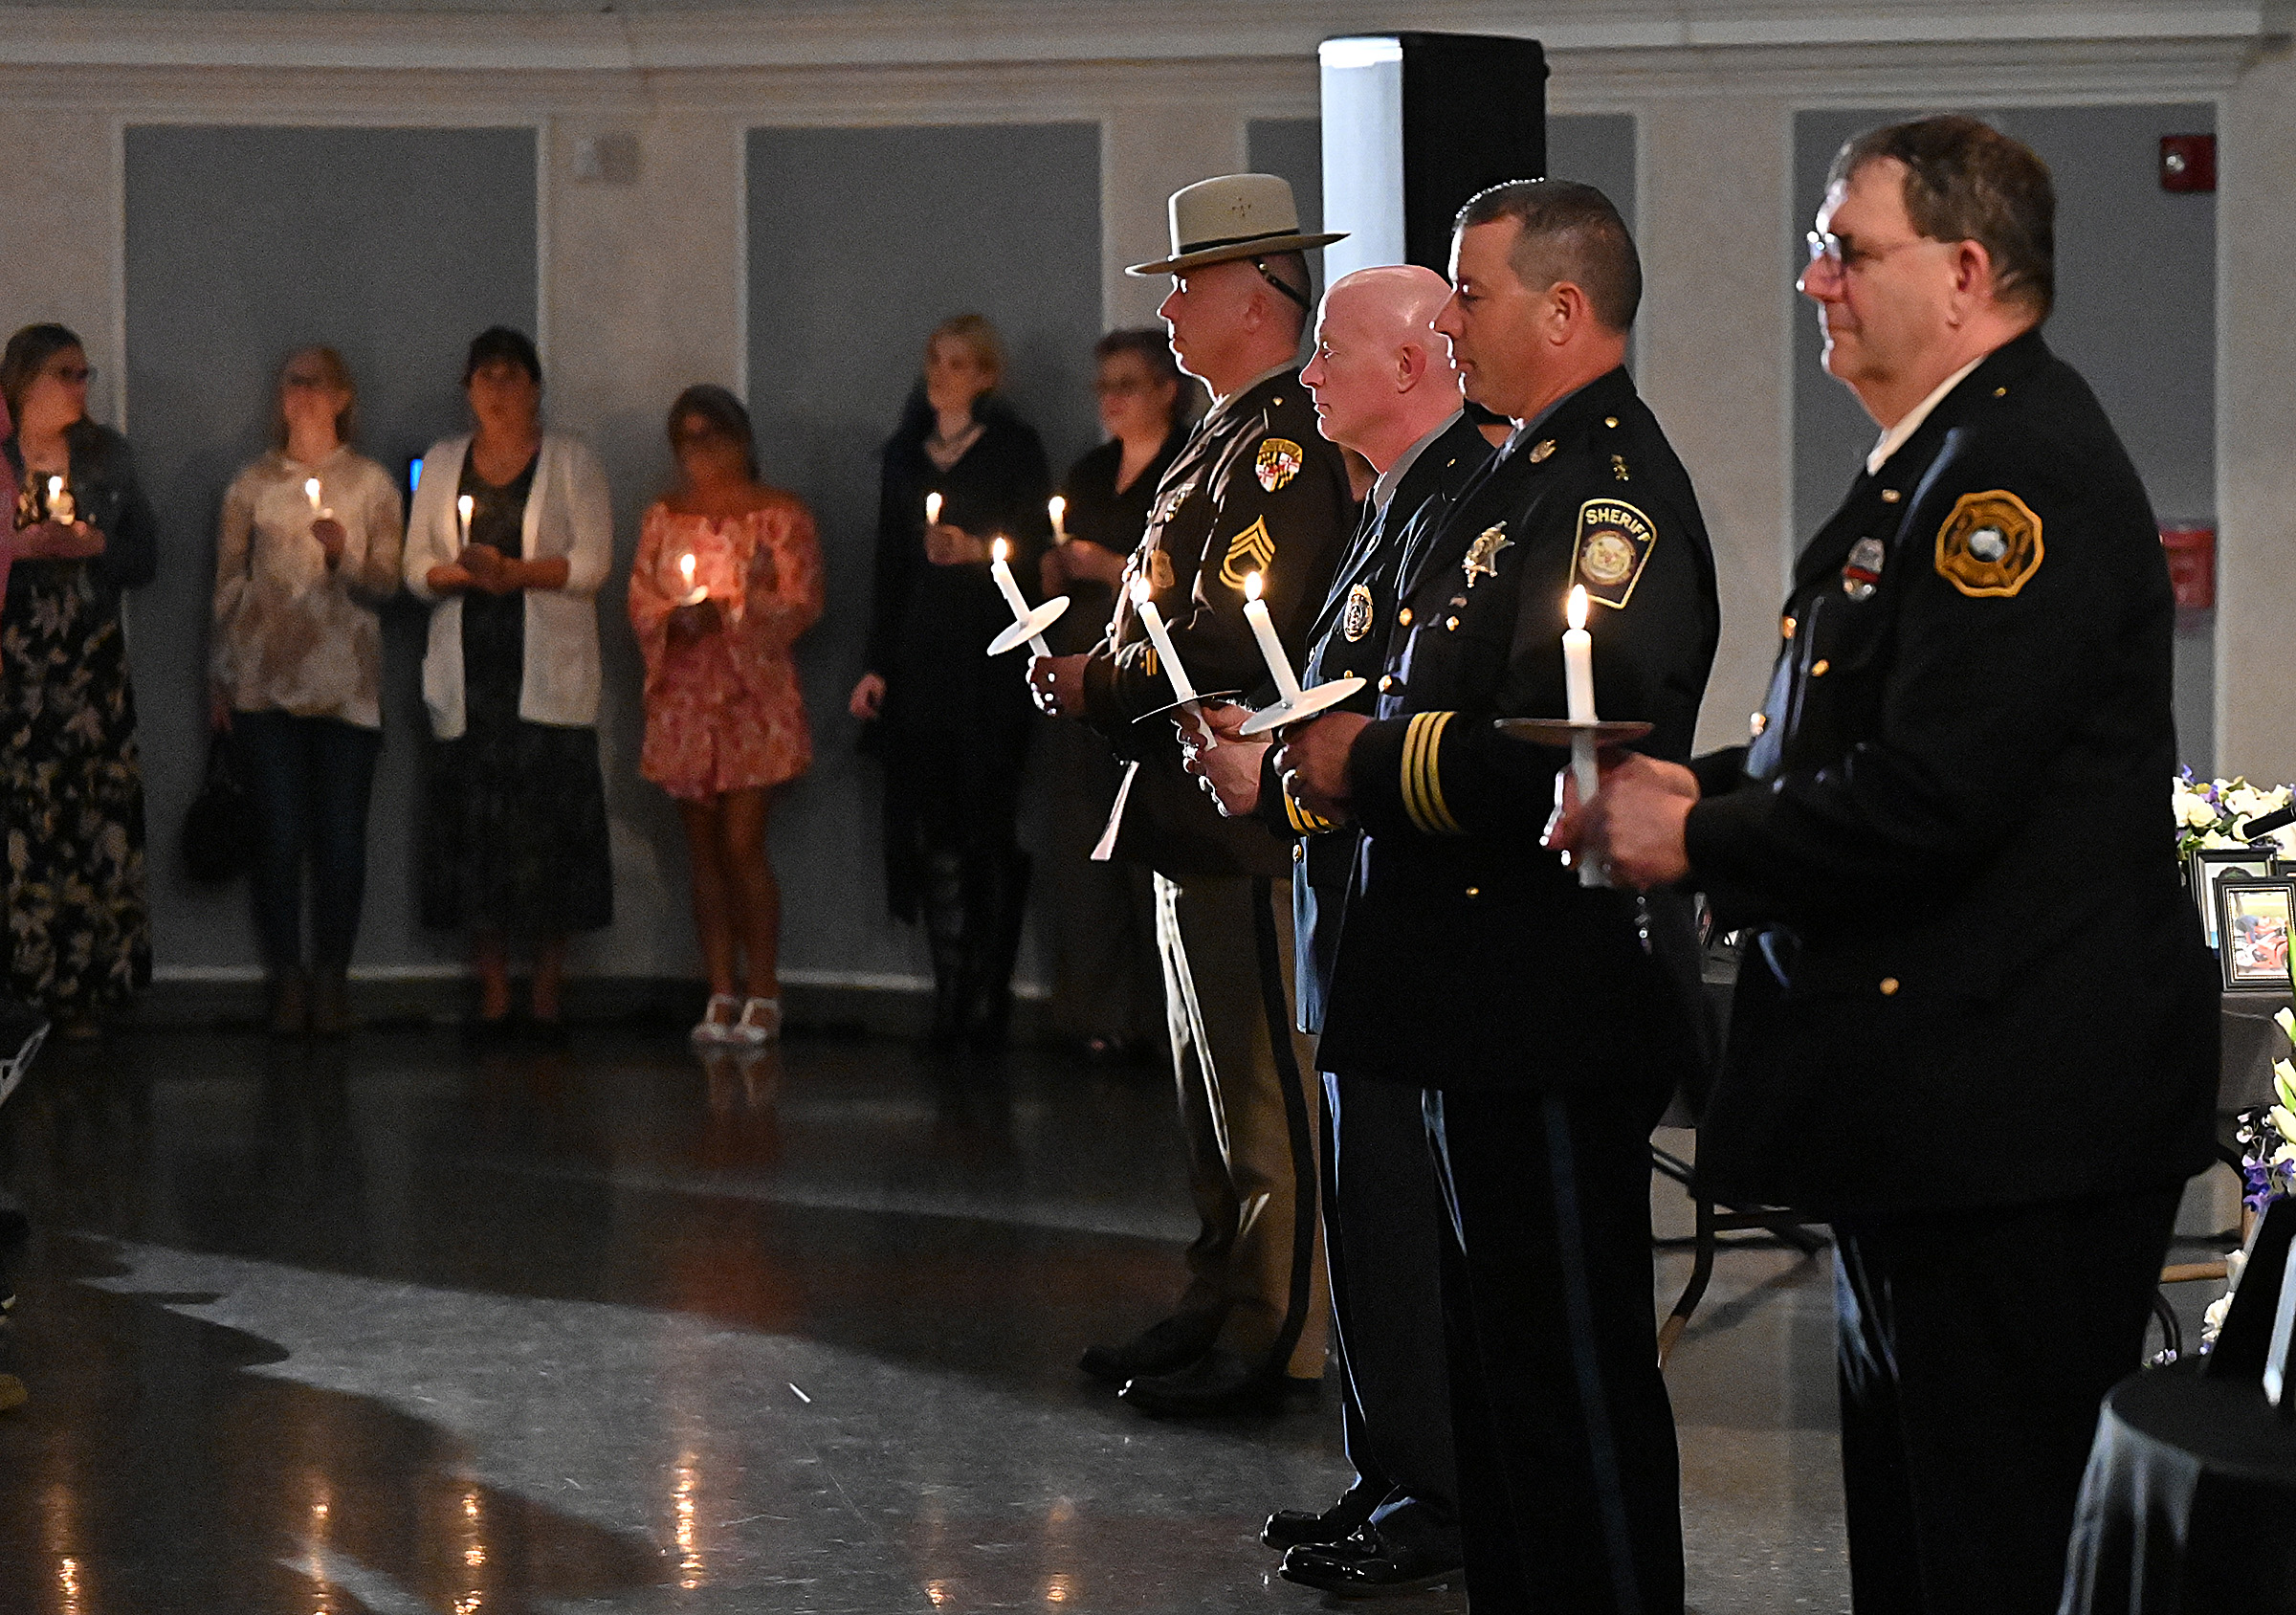 Left to right, Maryland State Police Detective Sergeant Jon M. McGee, Westminster Police Chief Thomas Ledwell, Carroll County Sheriff Jim DeWees and Westminster Common Councilmember Kevin E. Dayhoff, light candles for those remembering friends and loved ones lost to drug overdose at the 9th Annual Drug Overdose and Prevention Vigil Tuesday at Portico at St. John in Westminster. (Jeffrey F. Bill/Staff photo)